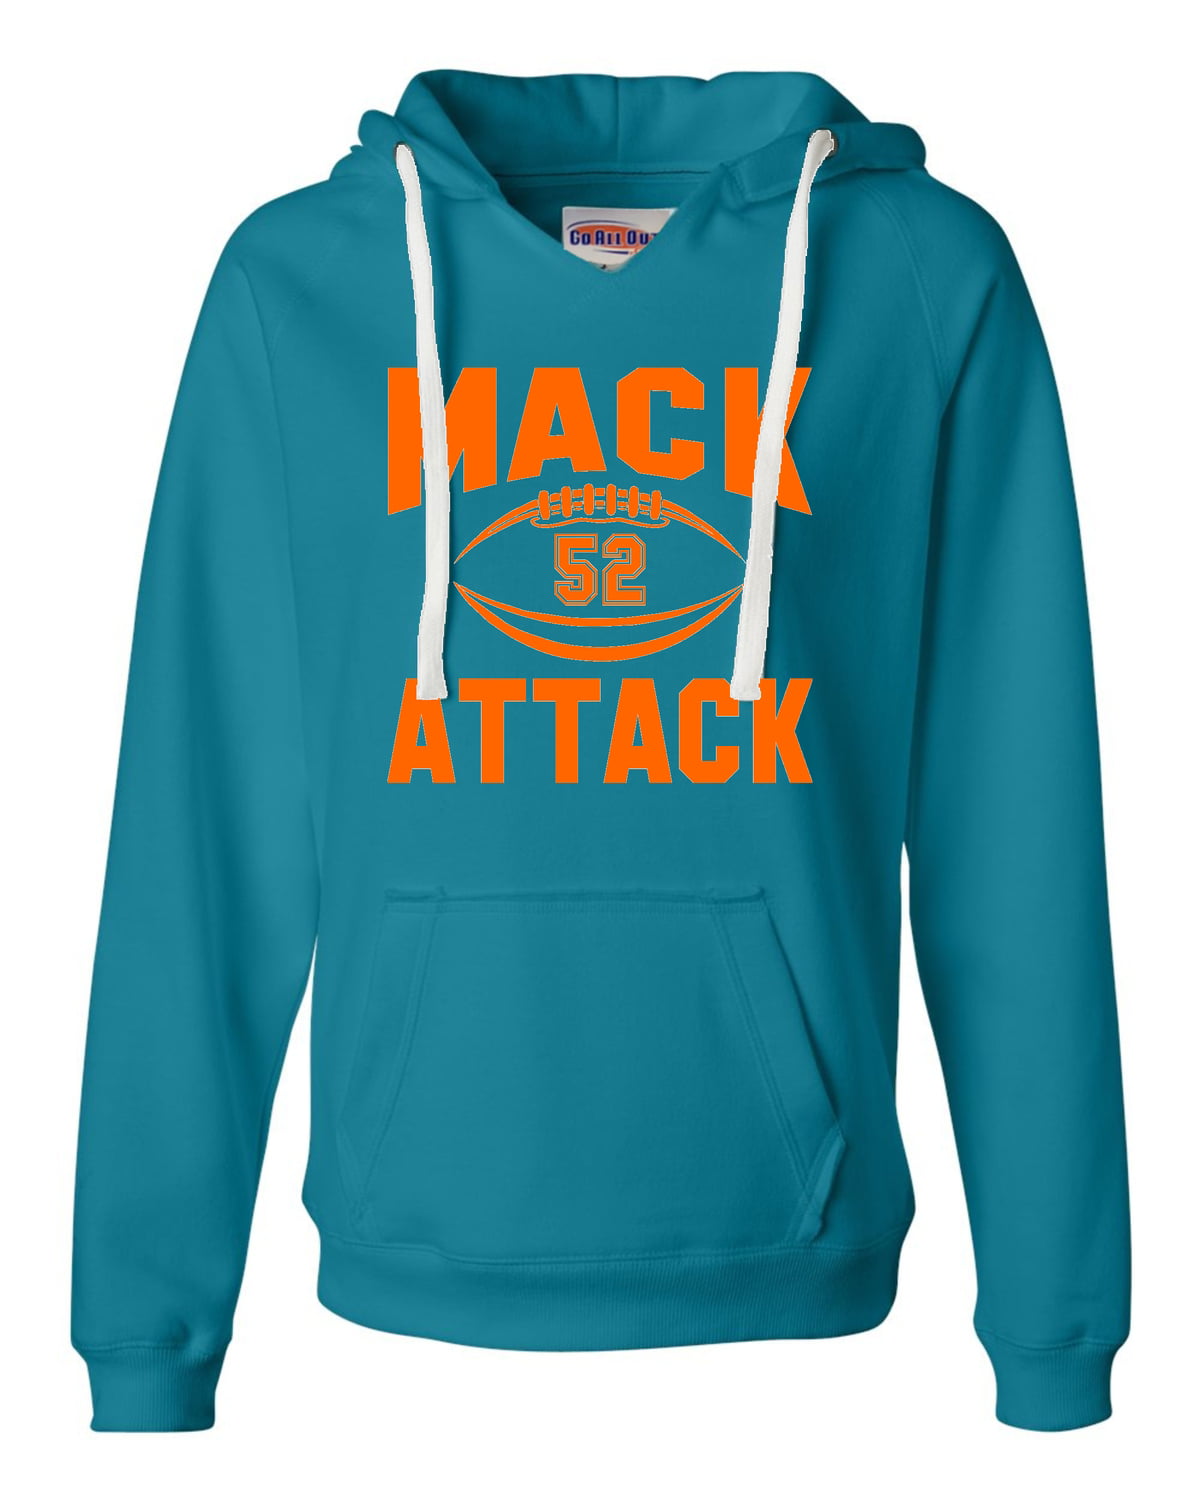 Mack Attack 52 Hoodies Adult and Youth Size 